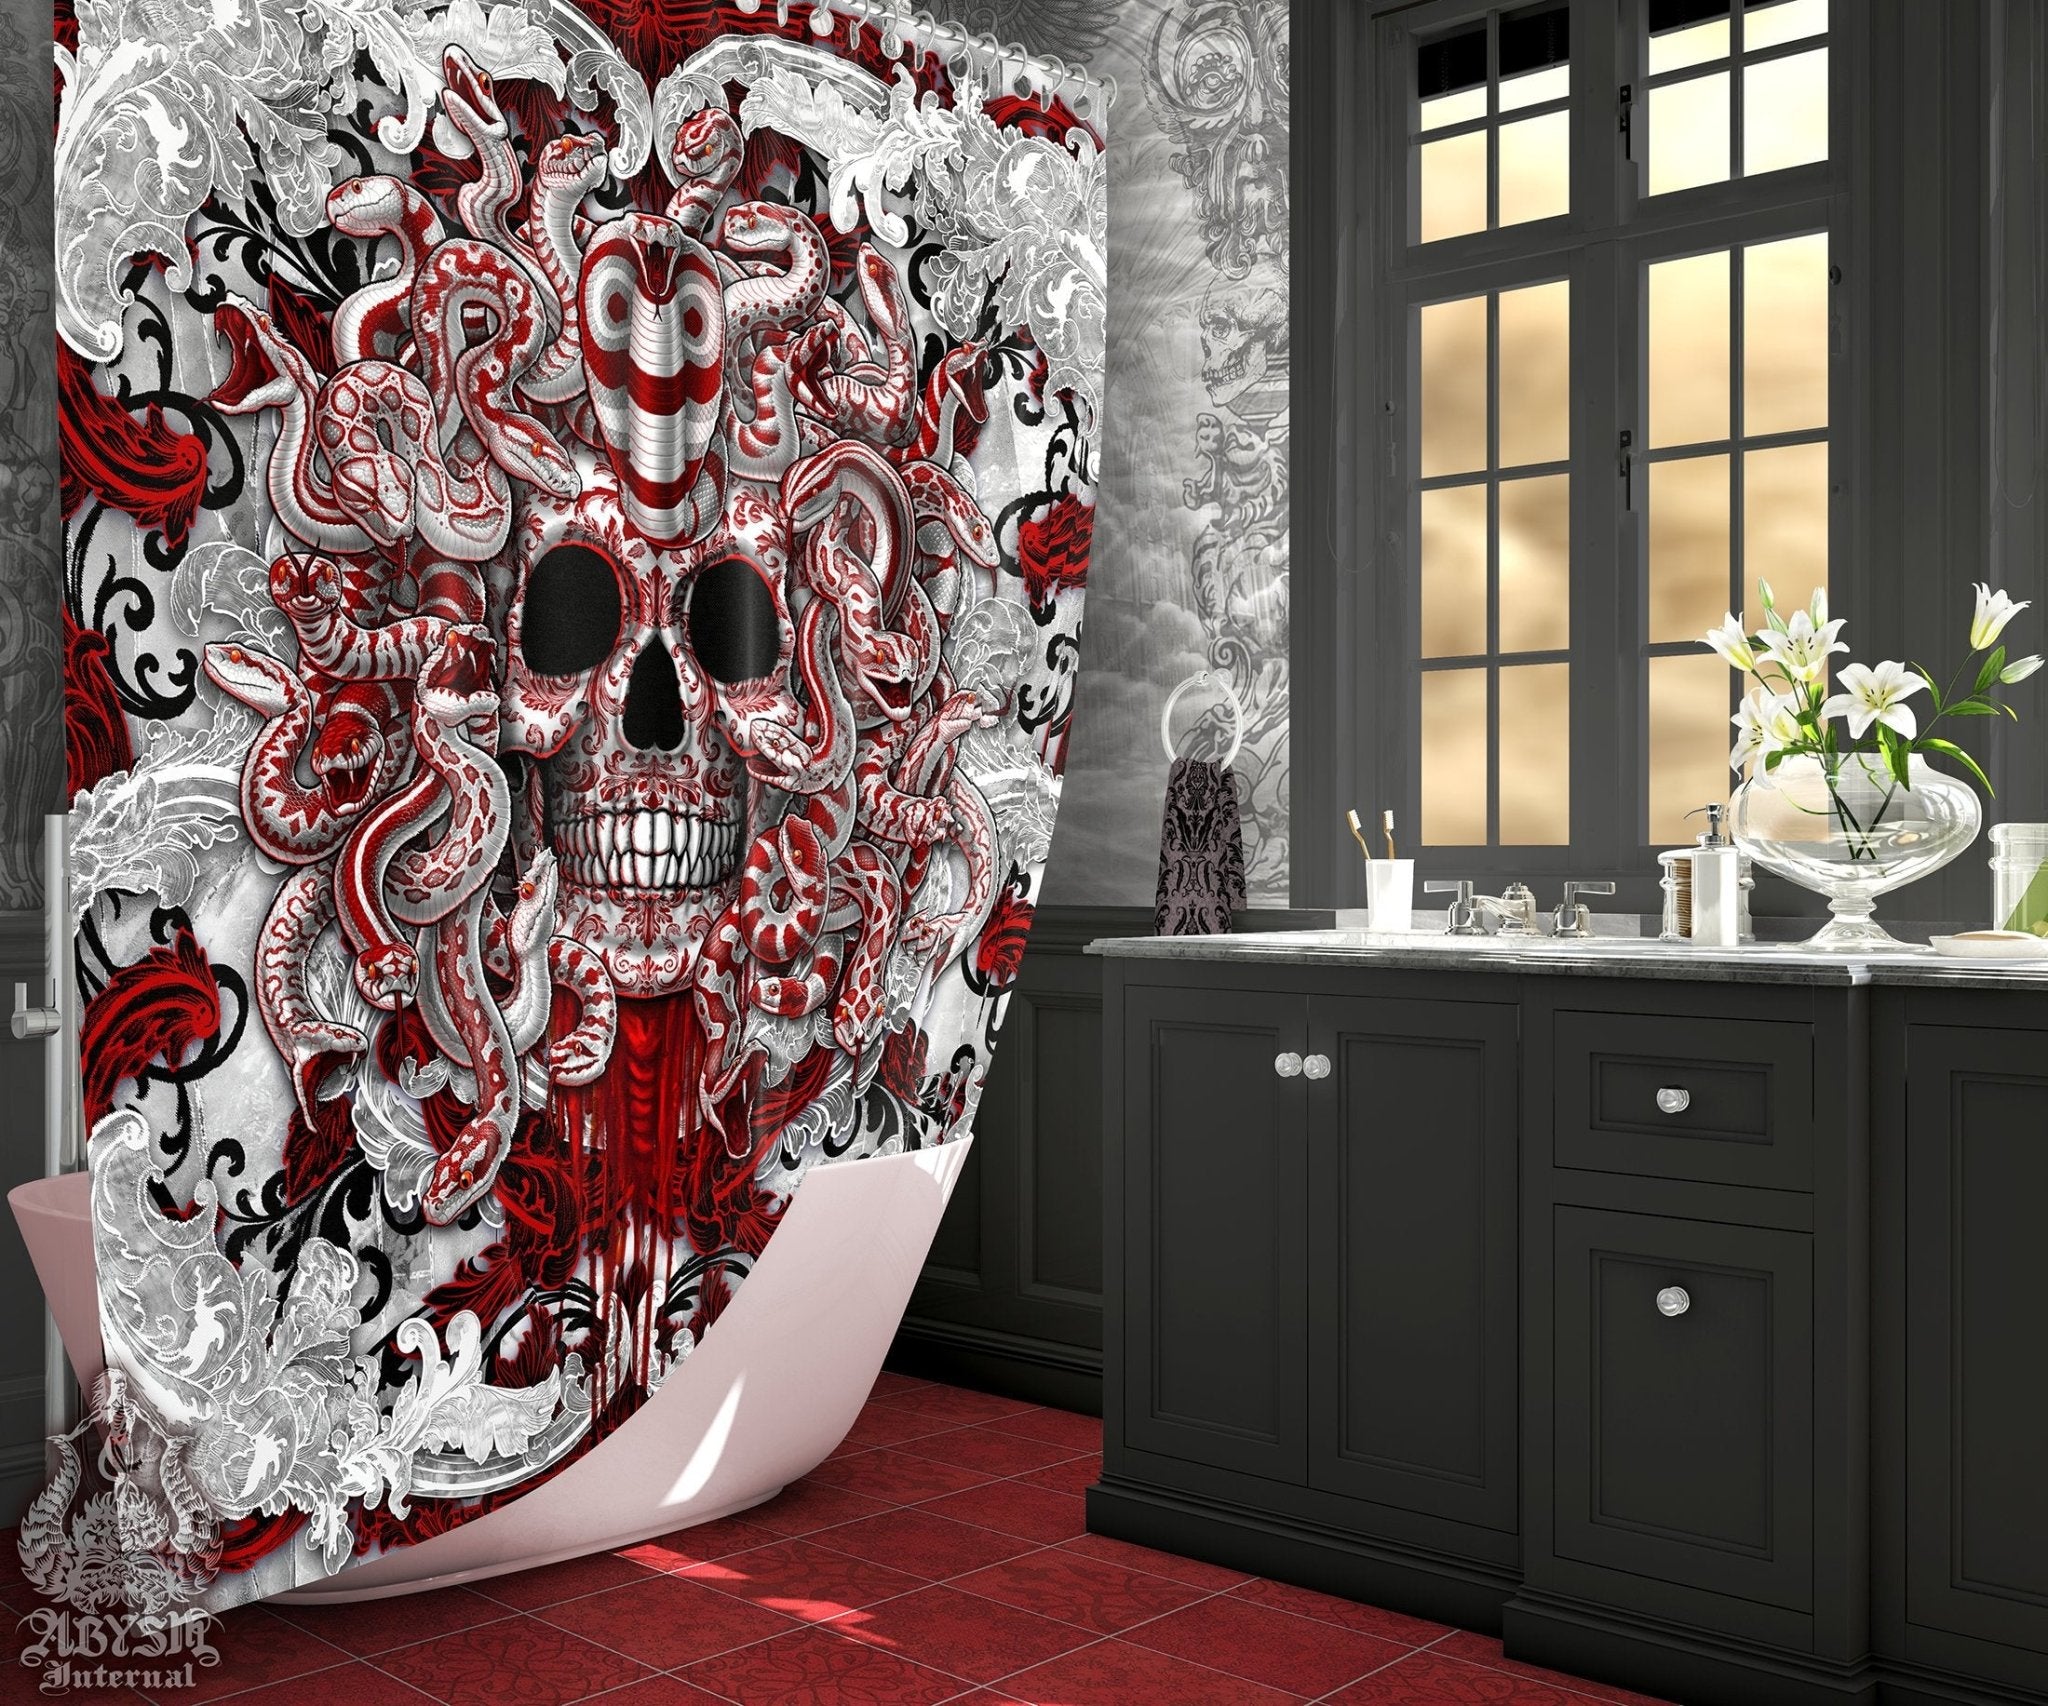 Skull Shower Curtain, Gothic Bathroom Decor, White Goth - Bloody Red Medusa and Snakes - Abysm Internal